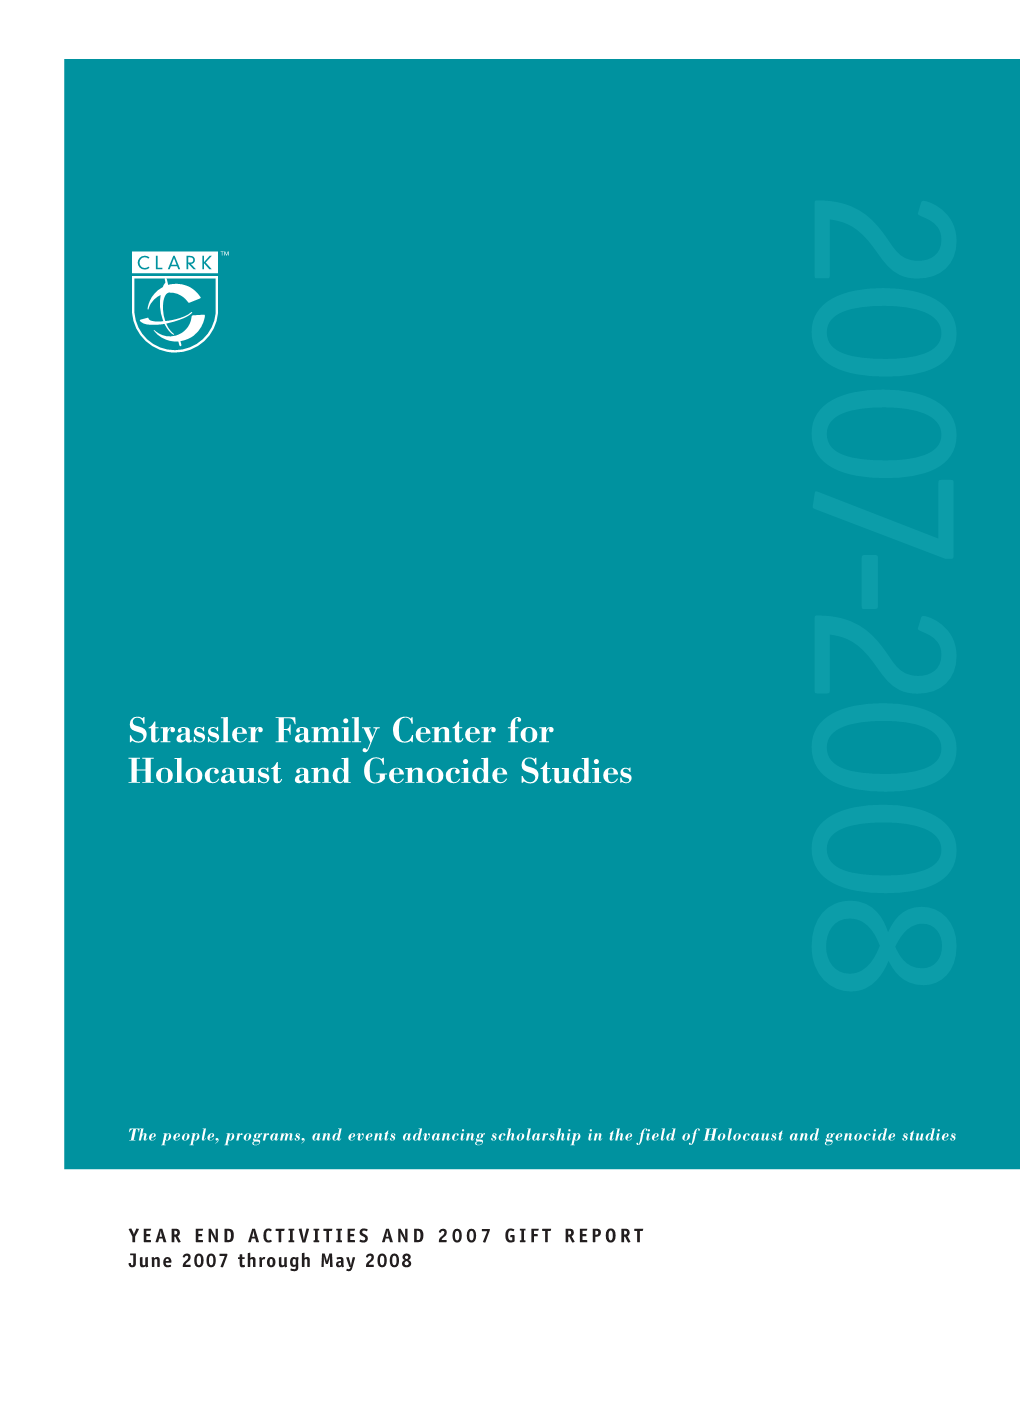 Strassler Family Center for Holocaust and Genocide Studies